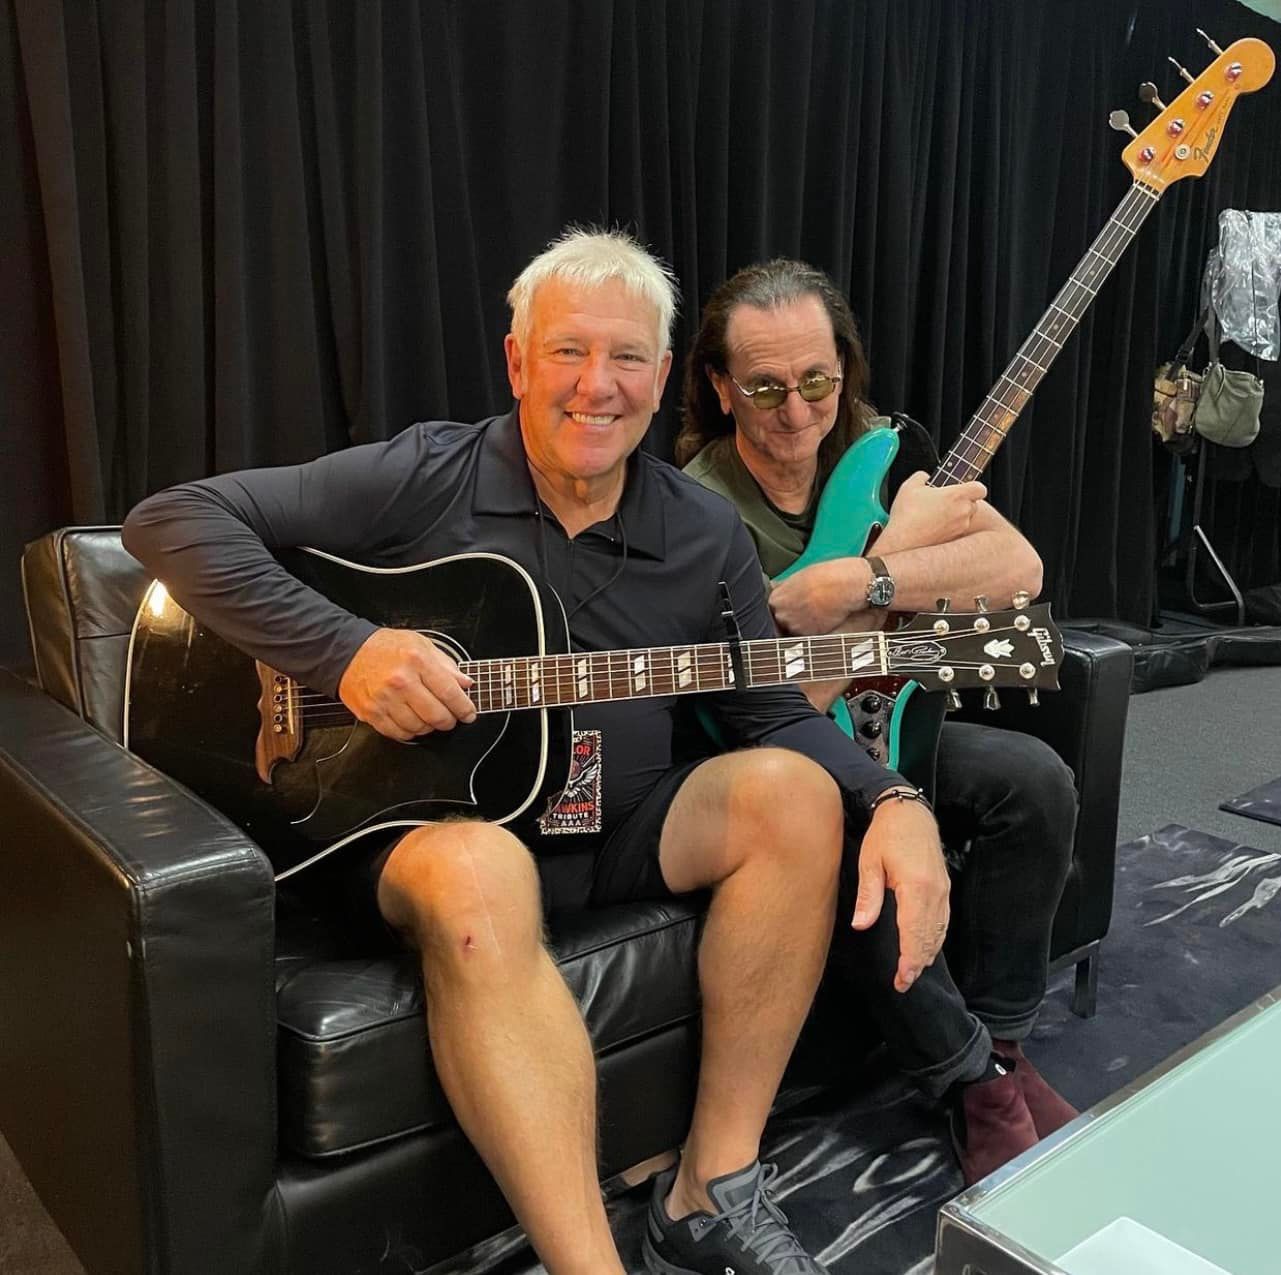 Taylor Hawkins Tribute Concert Photos - Geddy Lee and Alex Lifeson Performance - Wembley Stadium, London, England - September 3rd, 2022